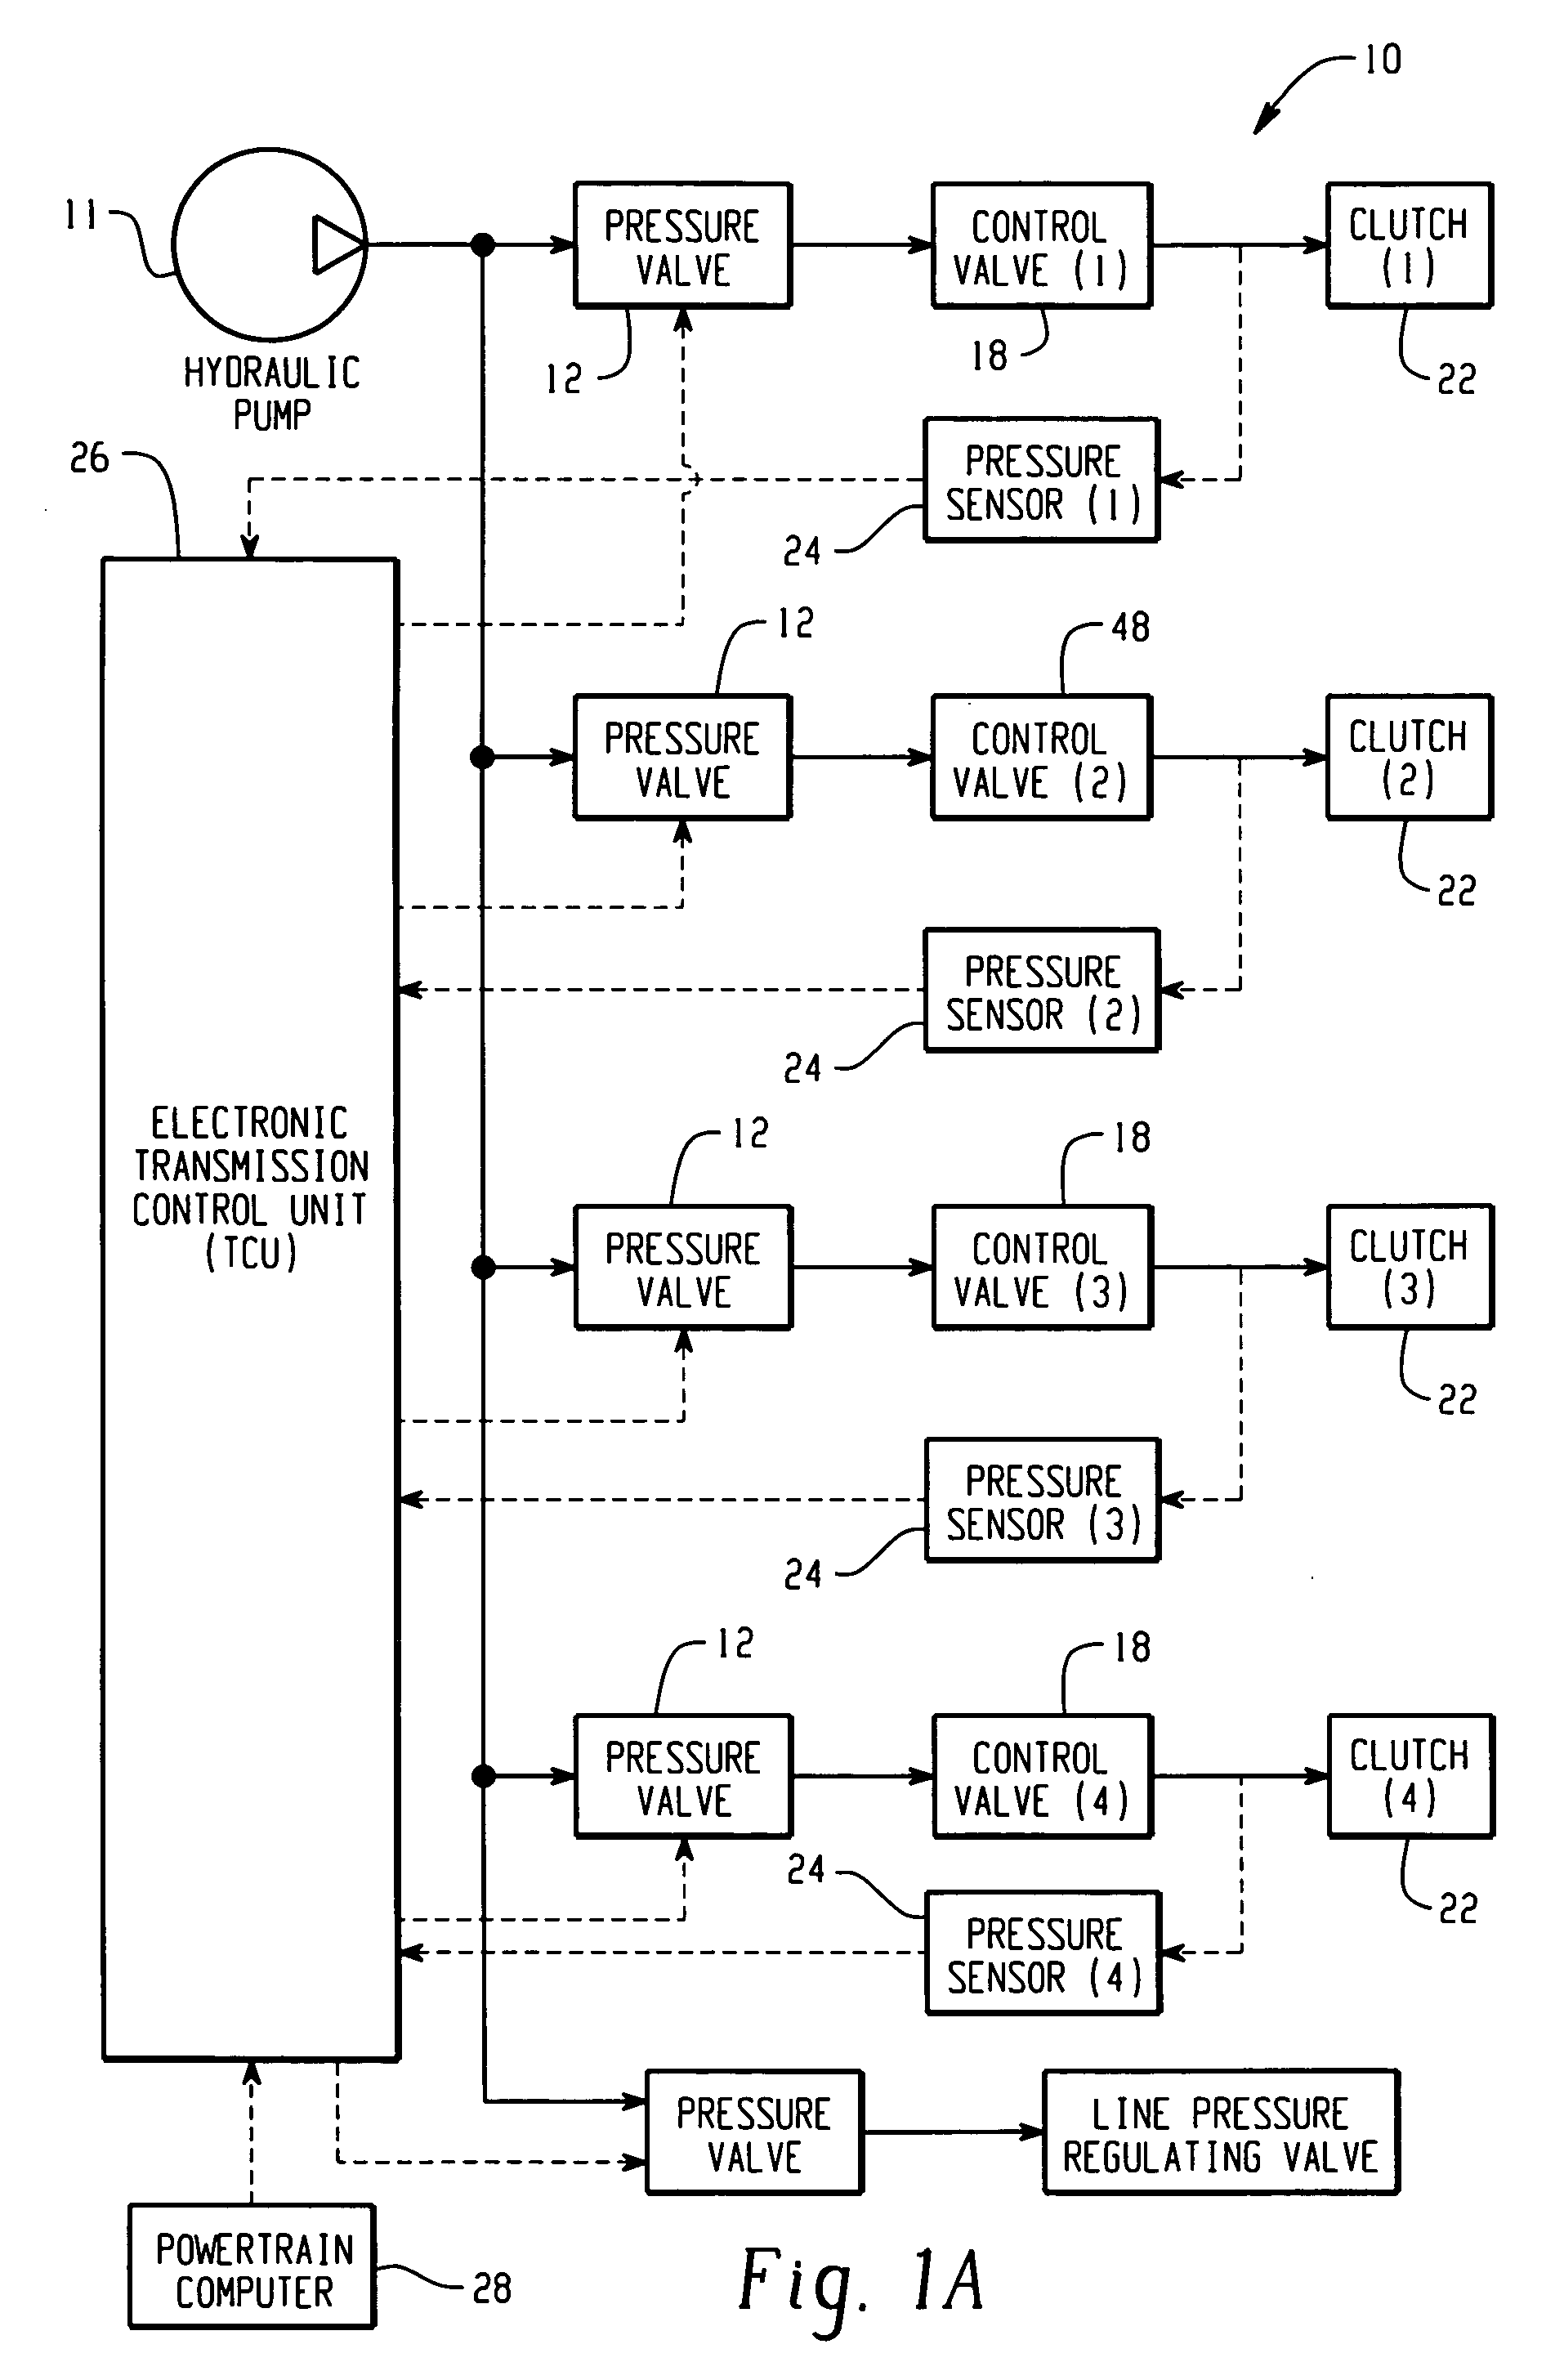 Manifold assembly having a centralized pressure sensing package